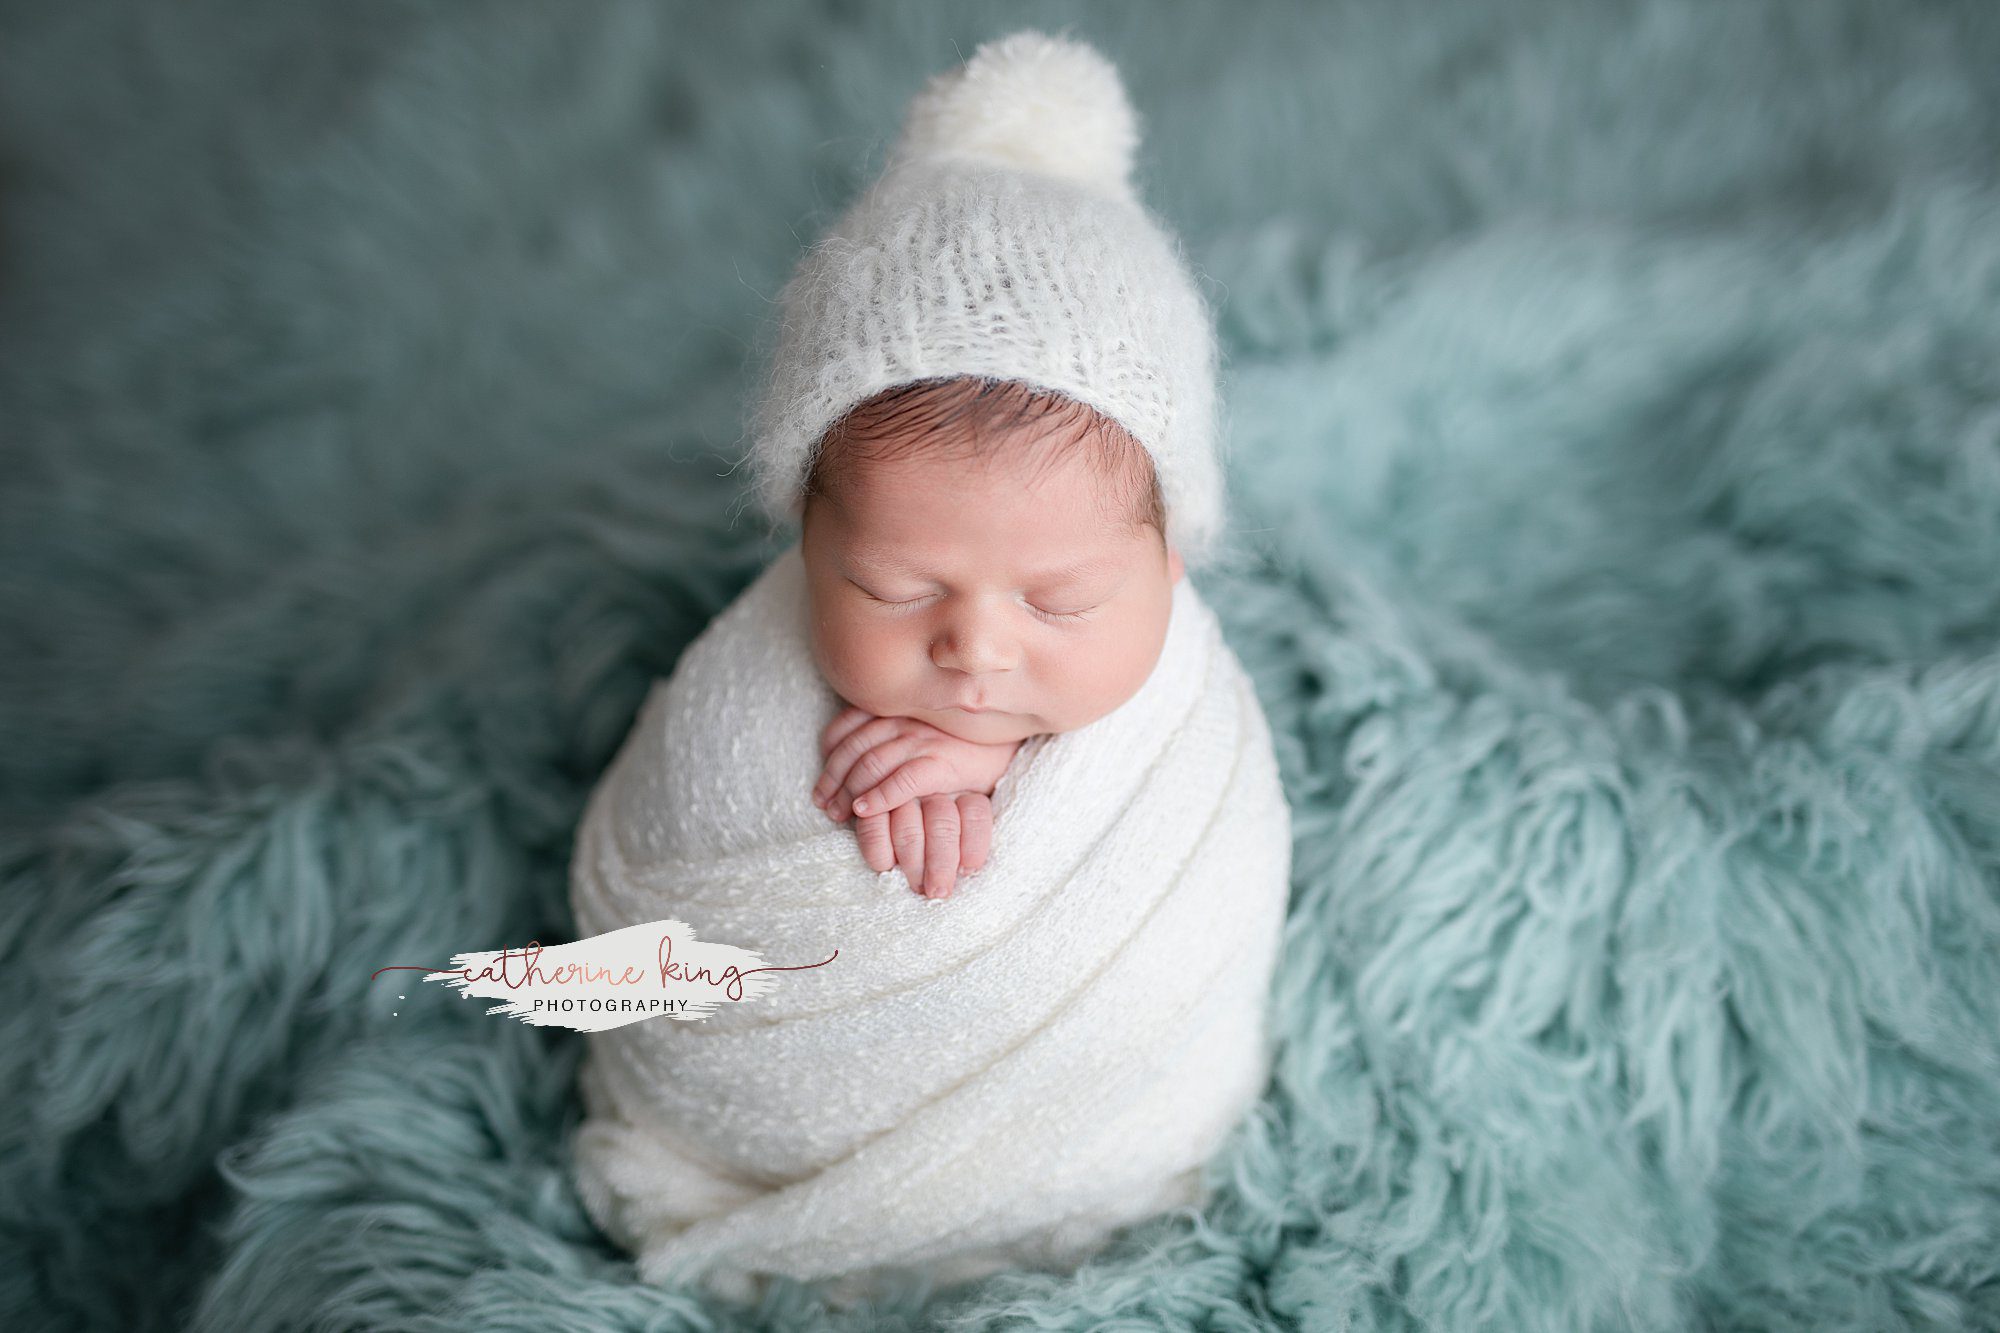 What I learned from photographing an in home newborn session